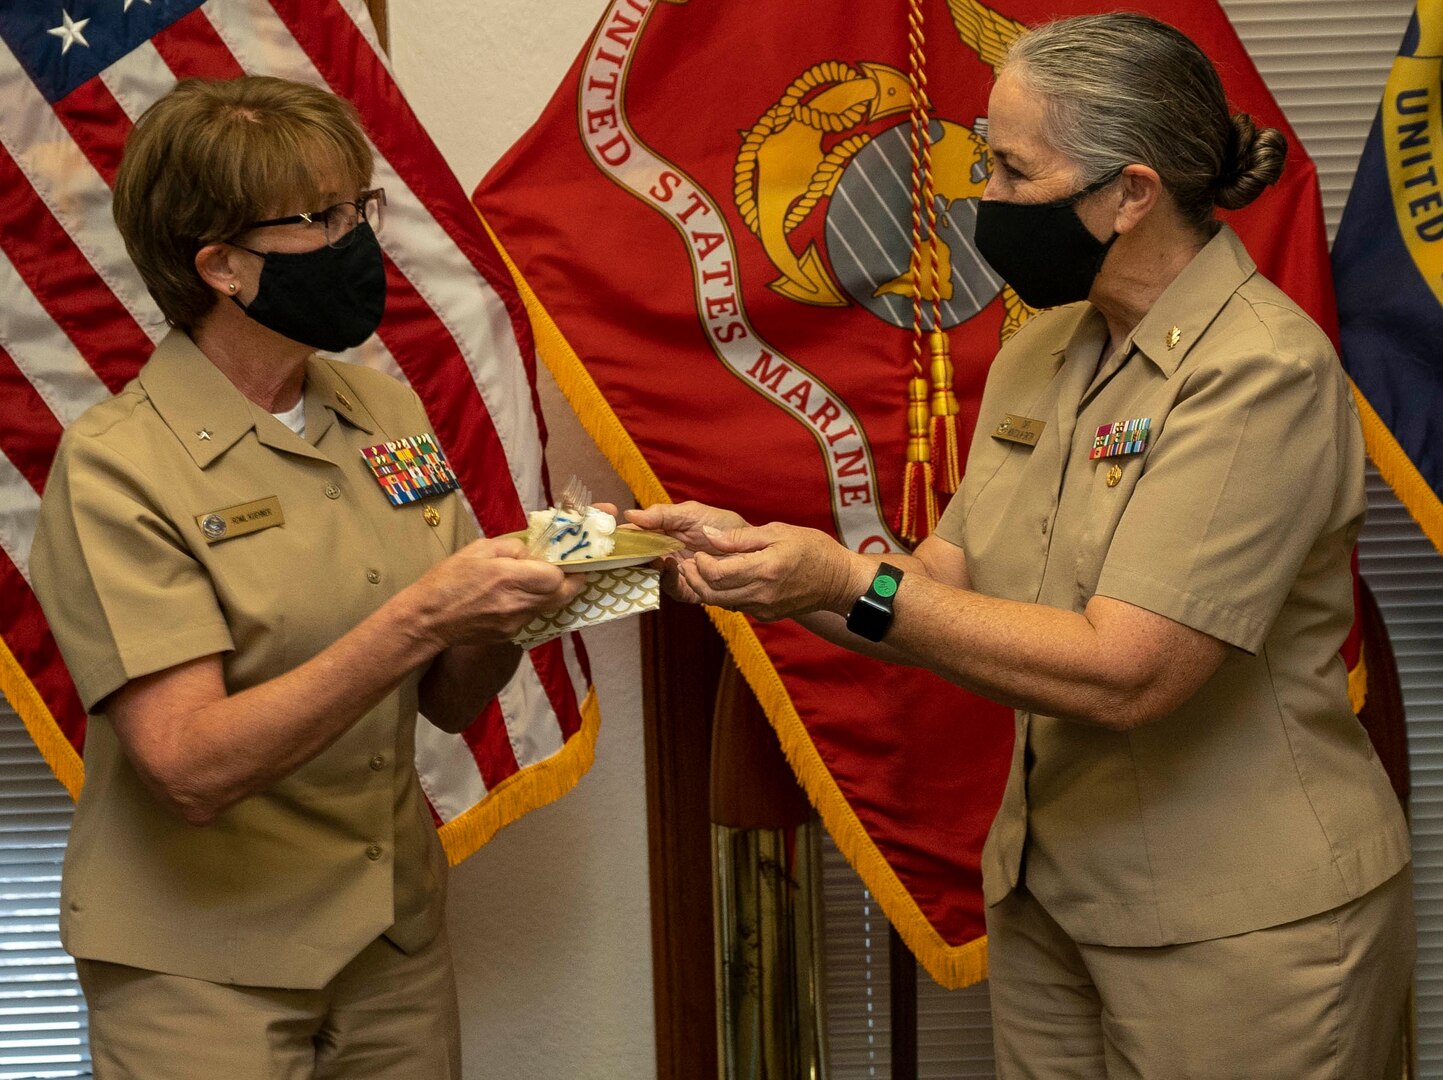 Rear Adm. Cynthia Kuehner (left), commander of Naval Medical Forces Support Command, receives the first slice of cake from Capt. Elizabeth Montcalm-Smith (right), the senior Sailor at NMFSC, during a ceremonial cake cutting to honor the Navy’s 245th birthday at Joint Base San Antonio-Fort Sam Houston Oct. 13.